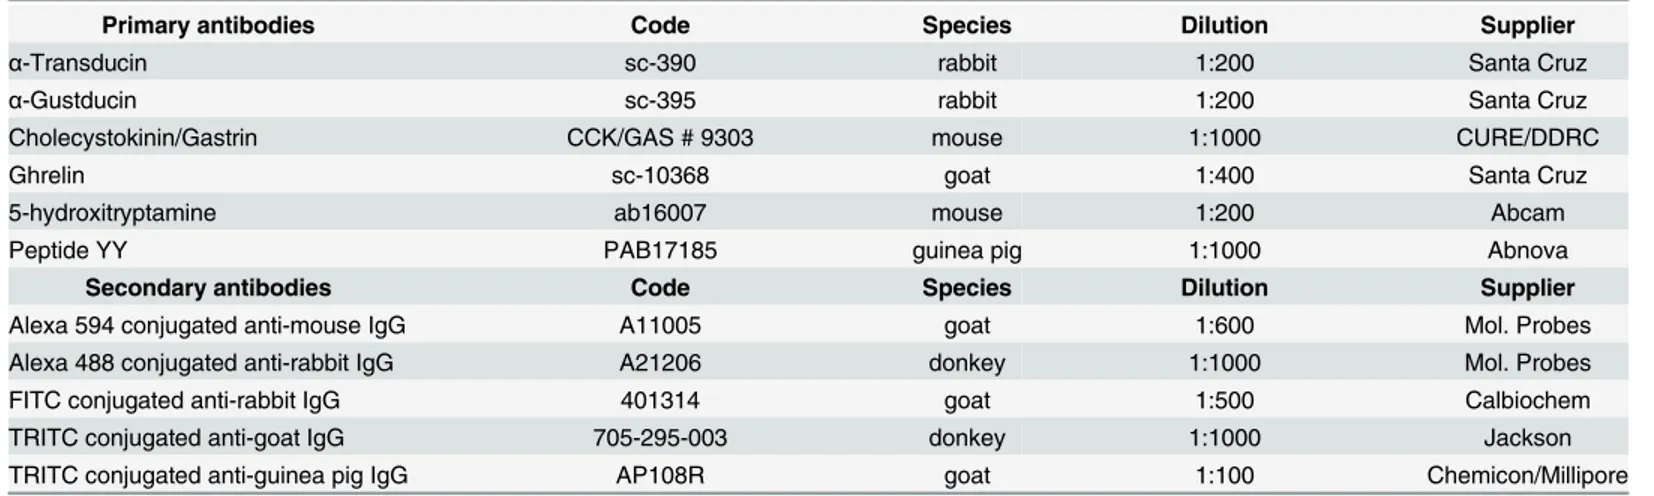 Table 1. List and dilutions of primary and secondary antibodies.